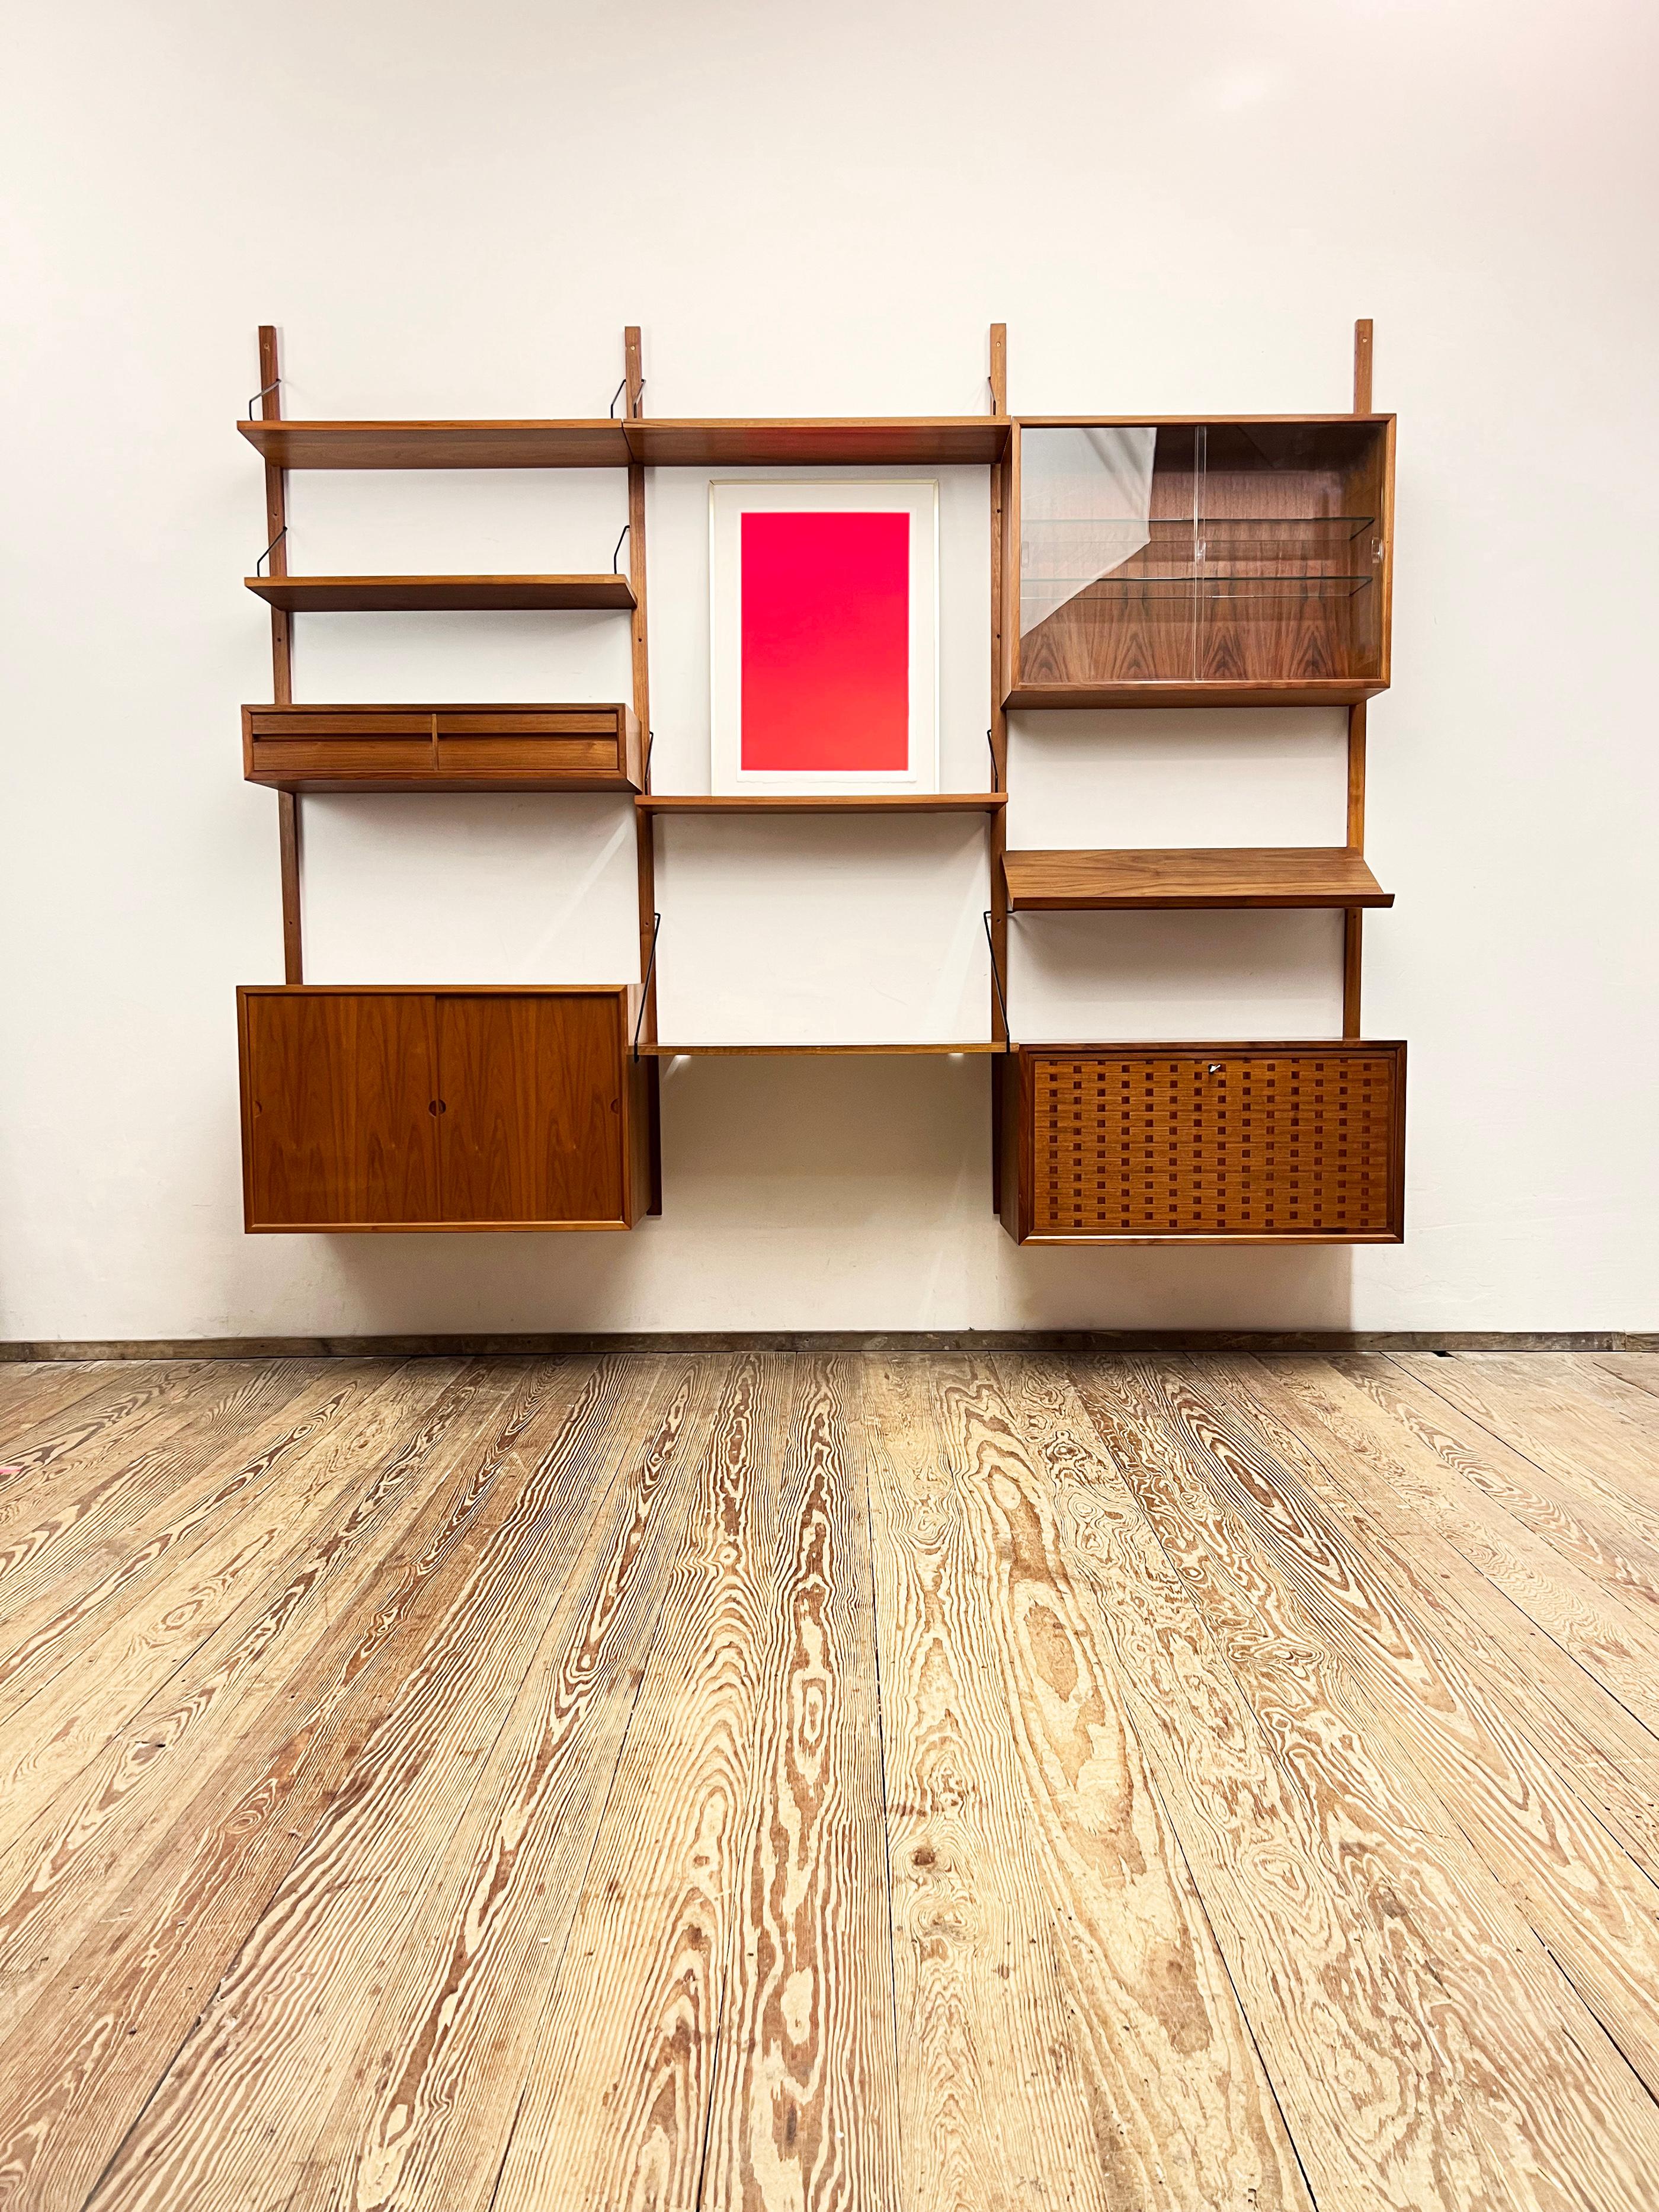 Danish Poul Cadovius Wall Unit, Mid-Century Modern Shelf Royal System, Denmark In Good Condition For Sale In München, Bavaria